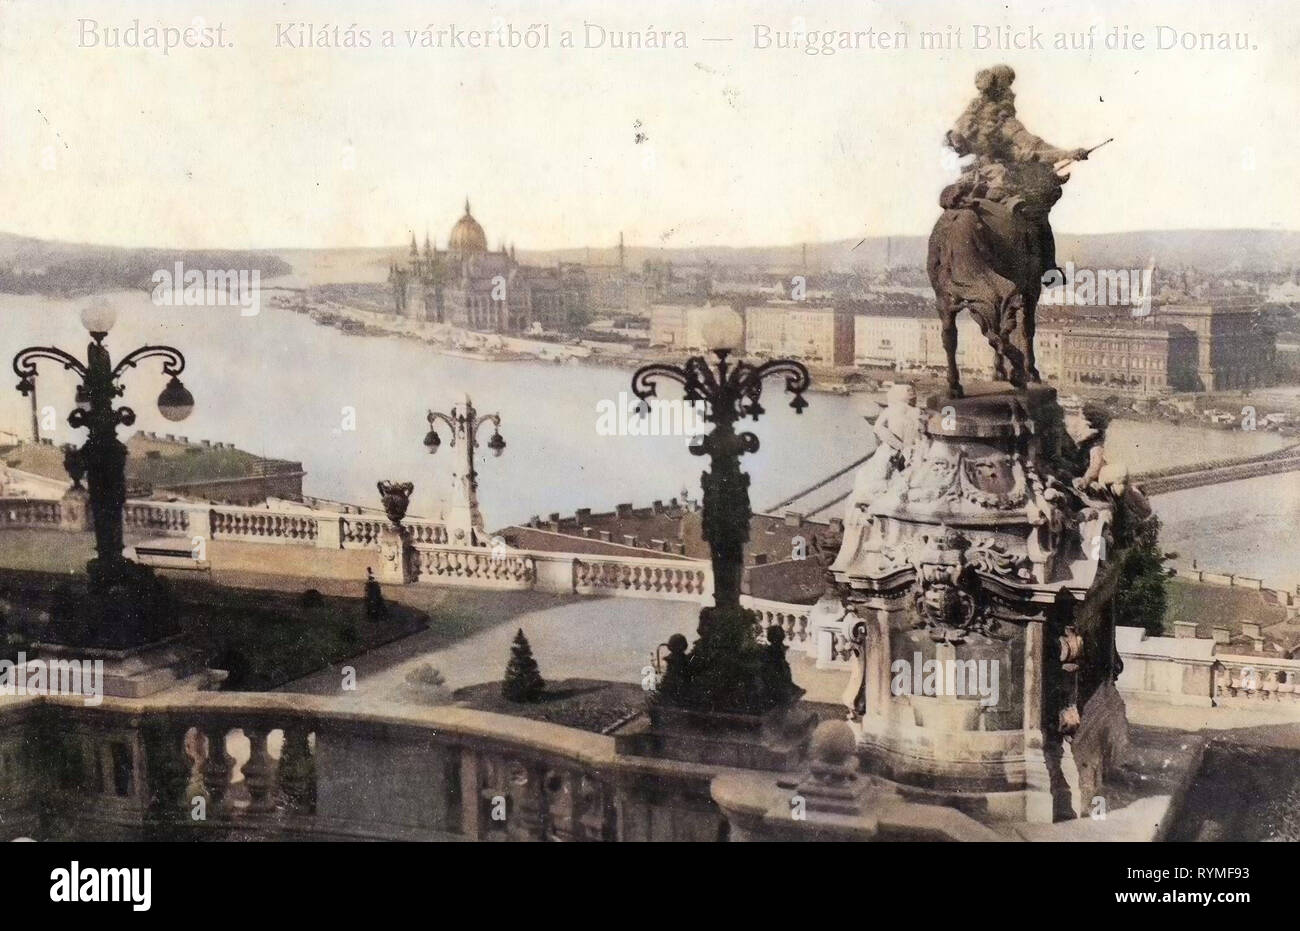 Hungarian Parliament Building from across the Danube, Prince Eugene monument, Budapest, 1907, Burggarten mit Blick auf die Donau, Hungary Stock Photo